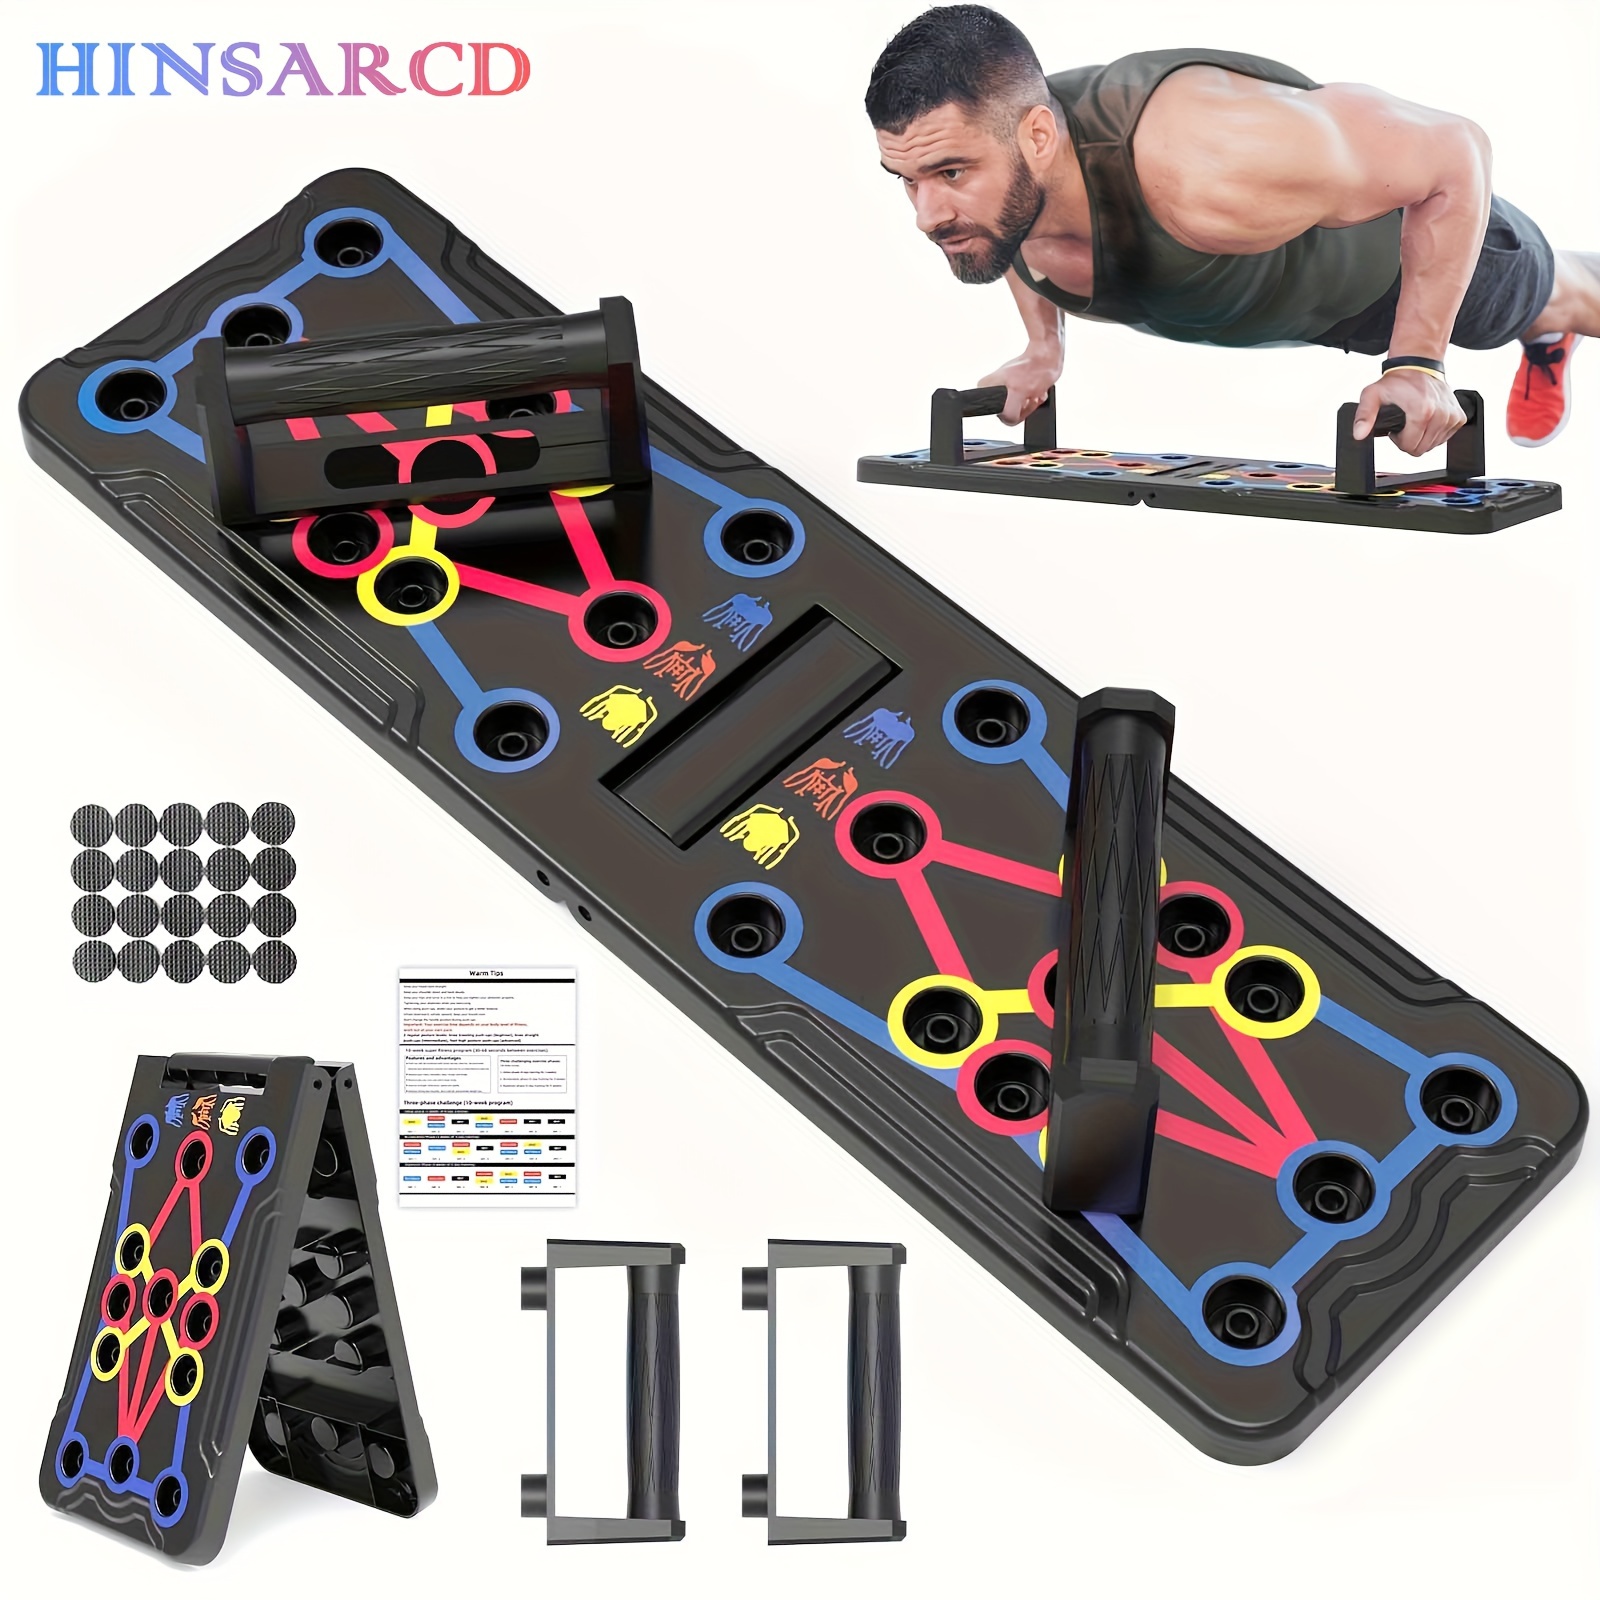 

Push Up Board, Foldable Multi-functional 20-in-1 Push Up Board, Chest Muscle Exercise Equipment For Men Women Fitness Training